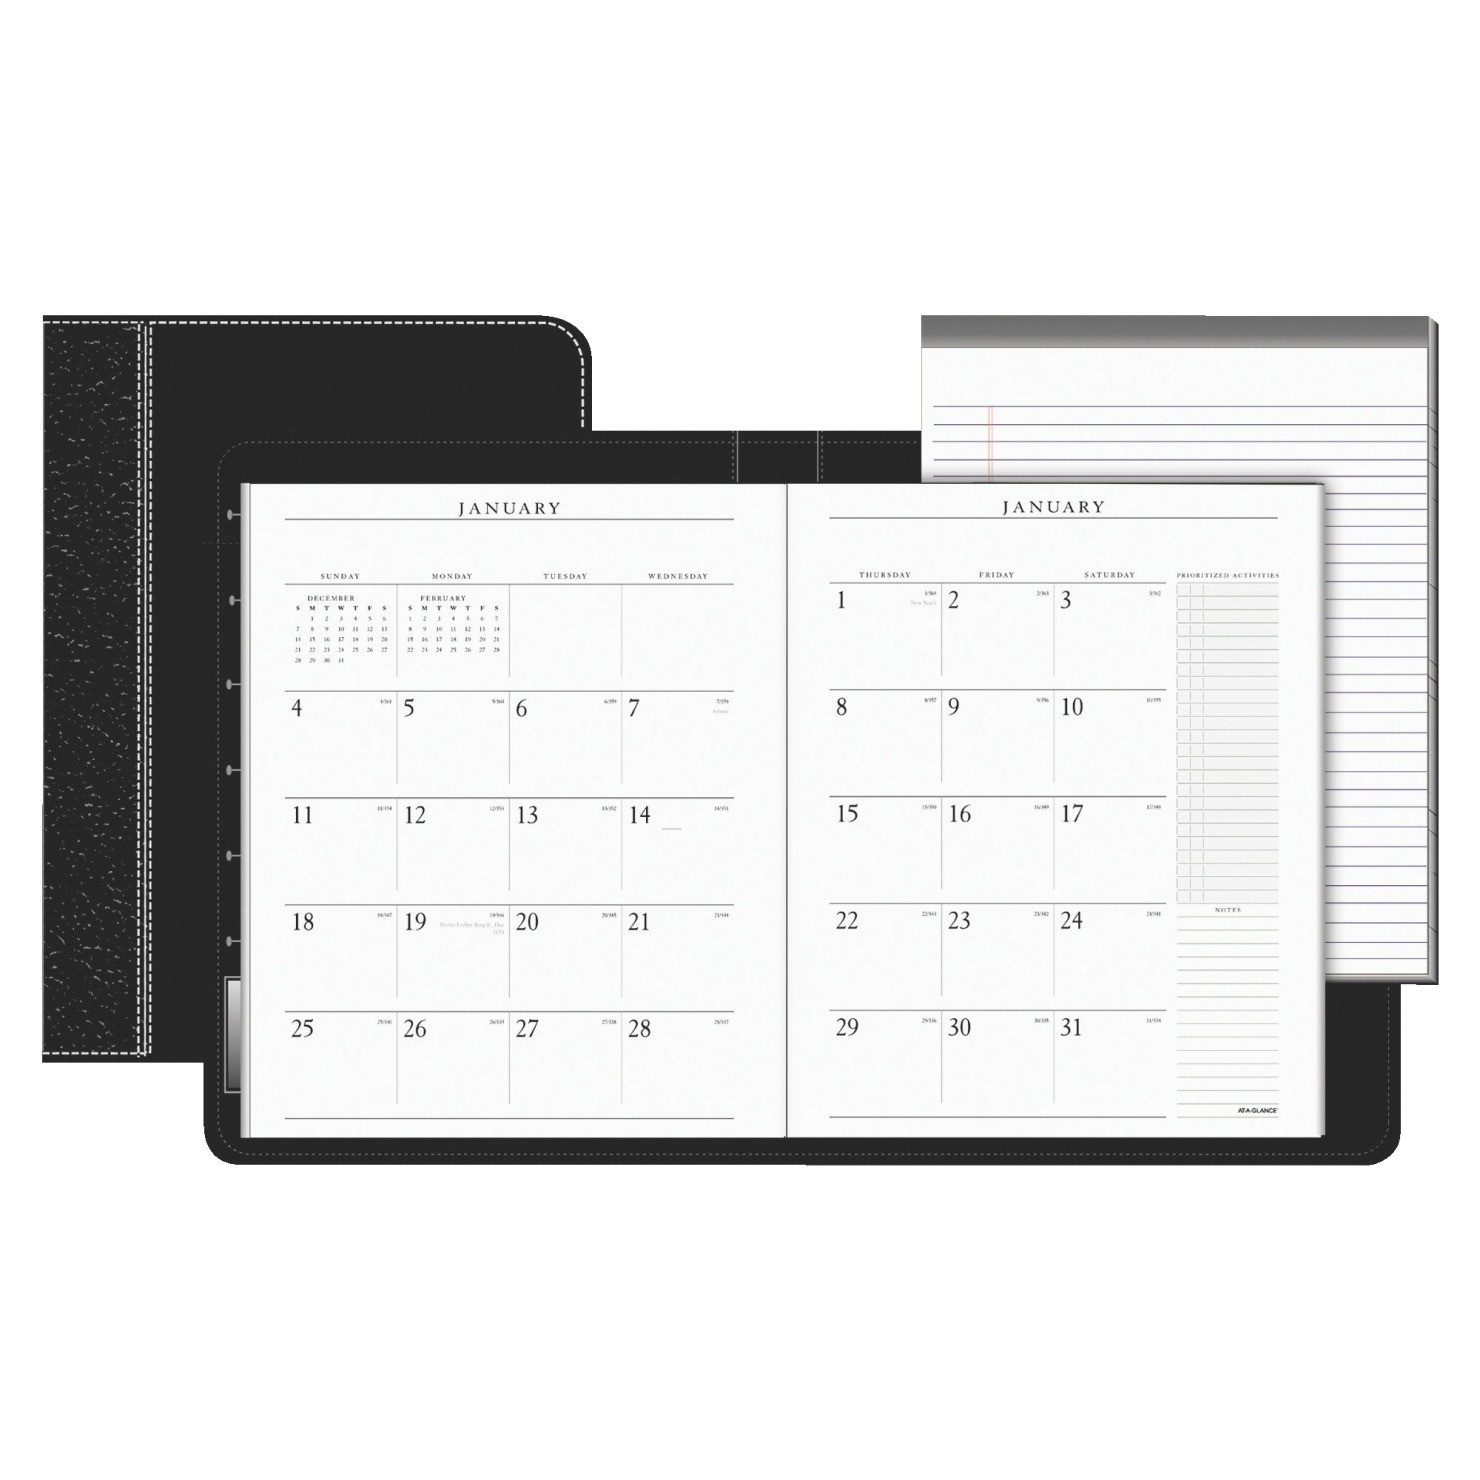 13 Month At-A-Glance Refillable Monthly Planner Padfolio - 9 x 11in, Jan - Jan, Black